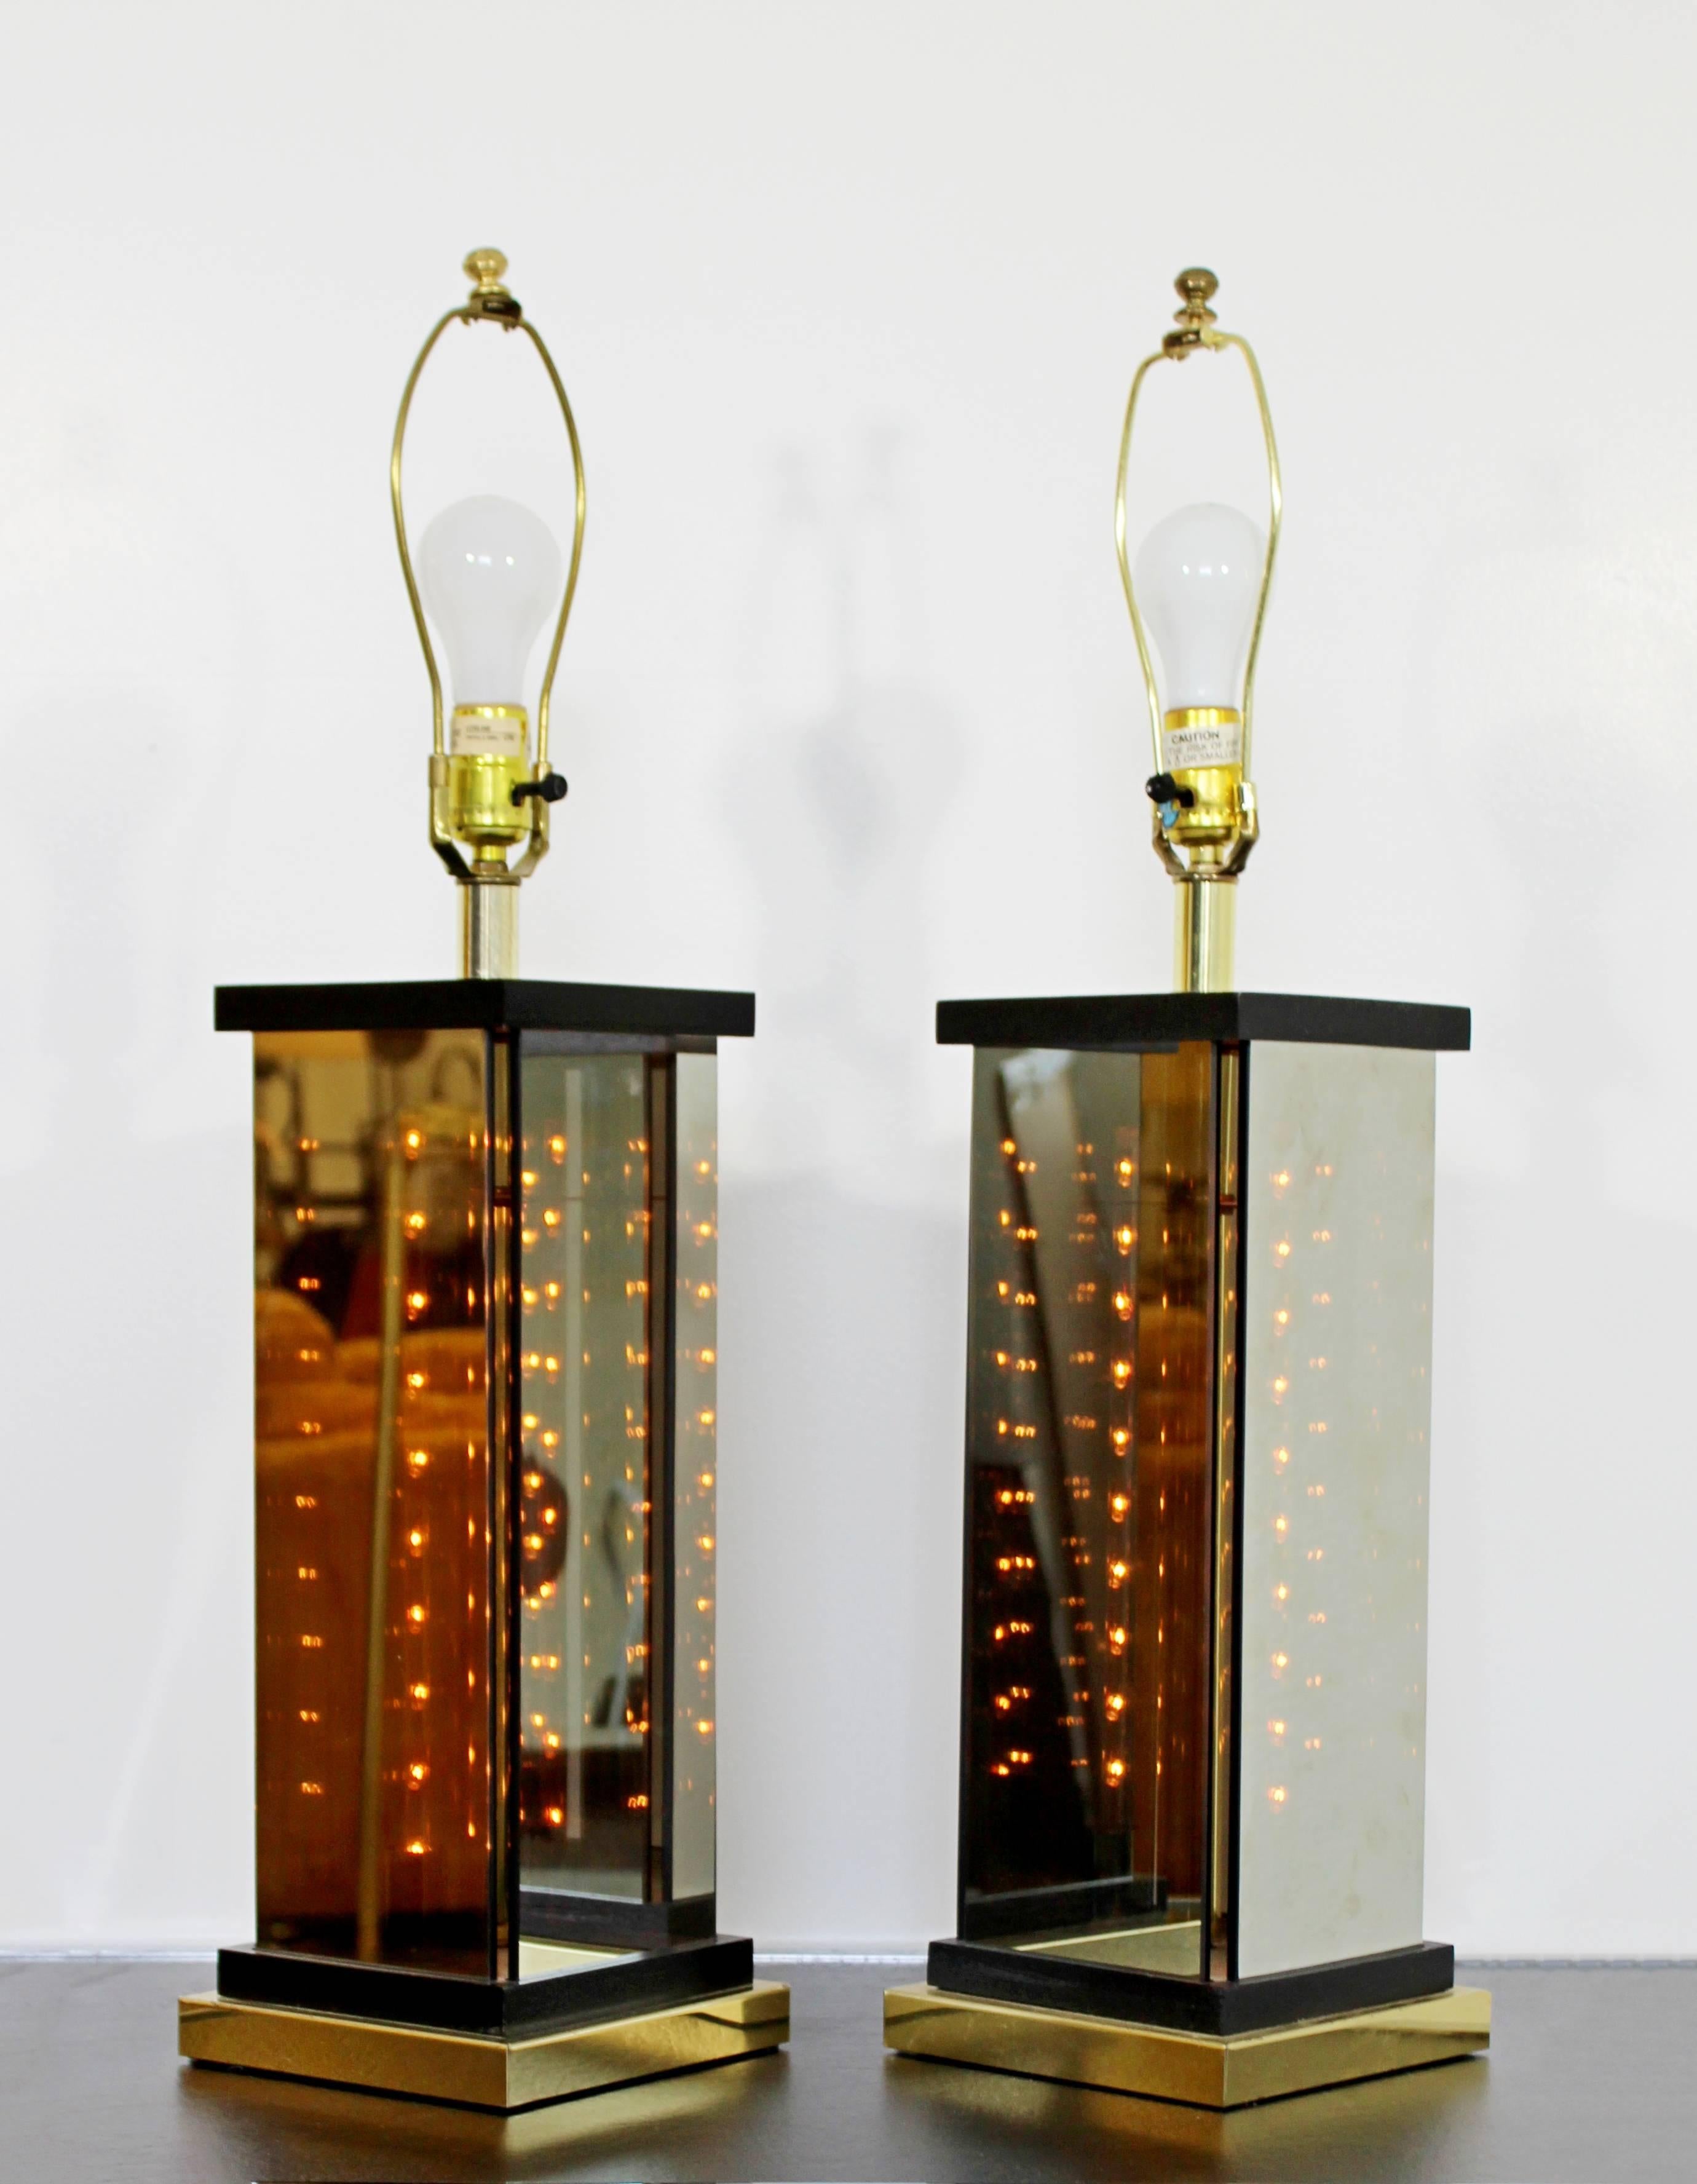 For your consideration is a phenomenal pair of Italian table lamps, made of brass and smoked glass, and the glass bases light up. When the lights are off the glass looks like a mirror and when the lights are on the glass looks smoked. In excellent